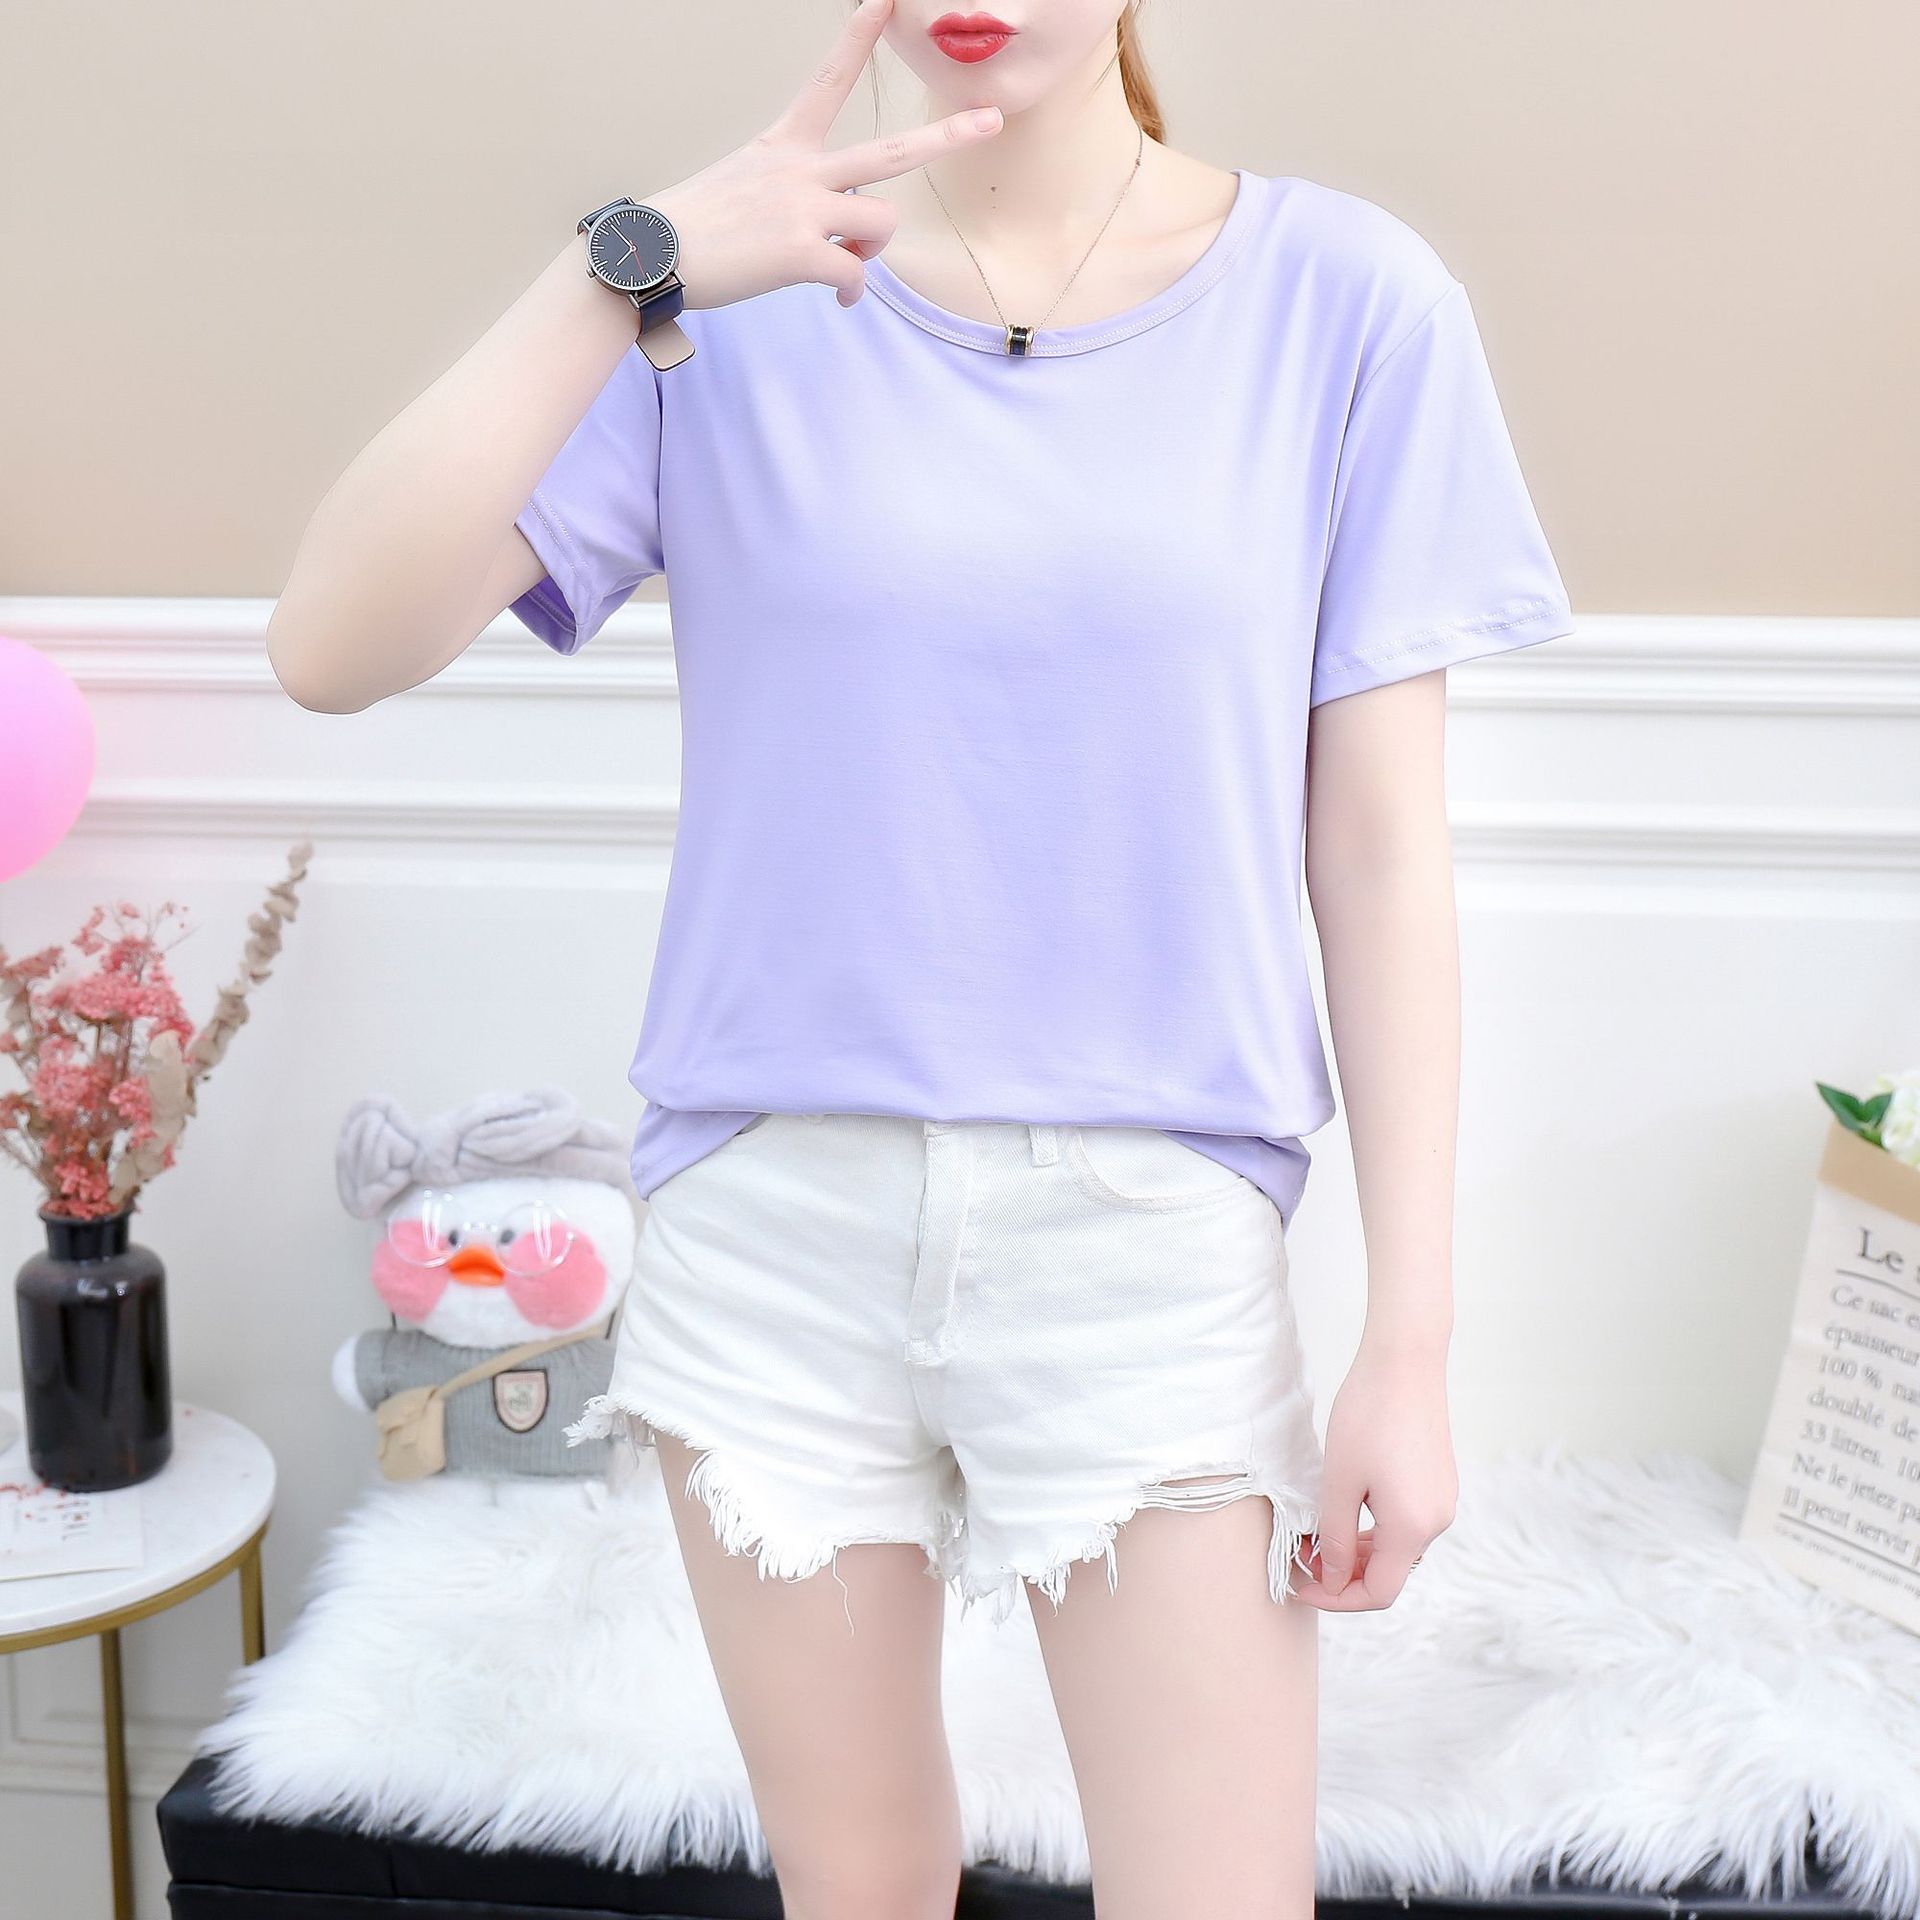 2022 Summer Men's and Women's New Pure White T Loose Casual Short-Sleeved Bottoming Shirt Activity Business Attire Light Board T-shirt Women's Clothing